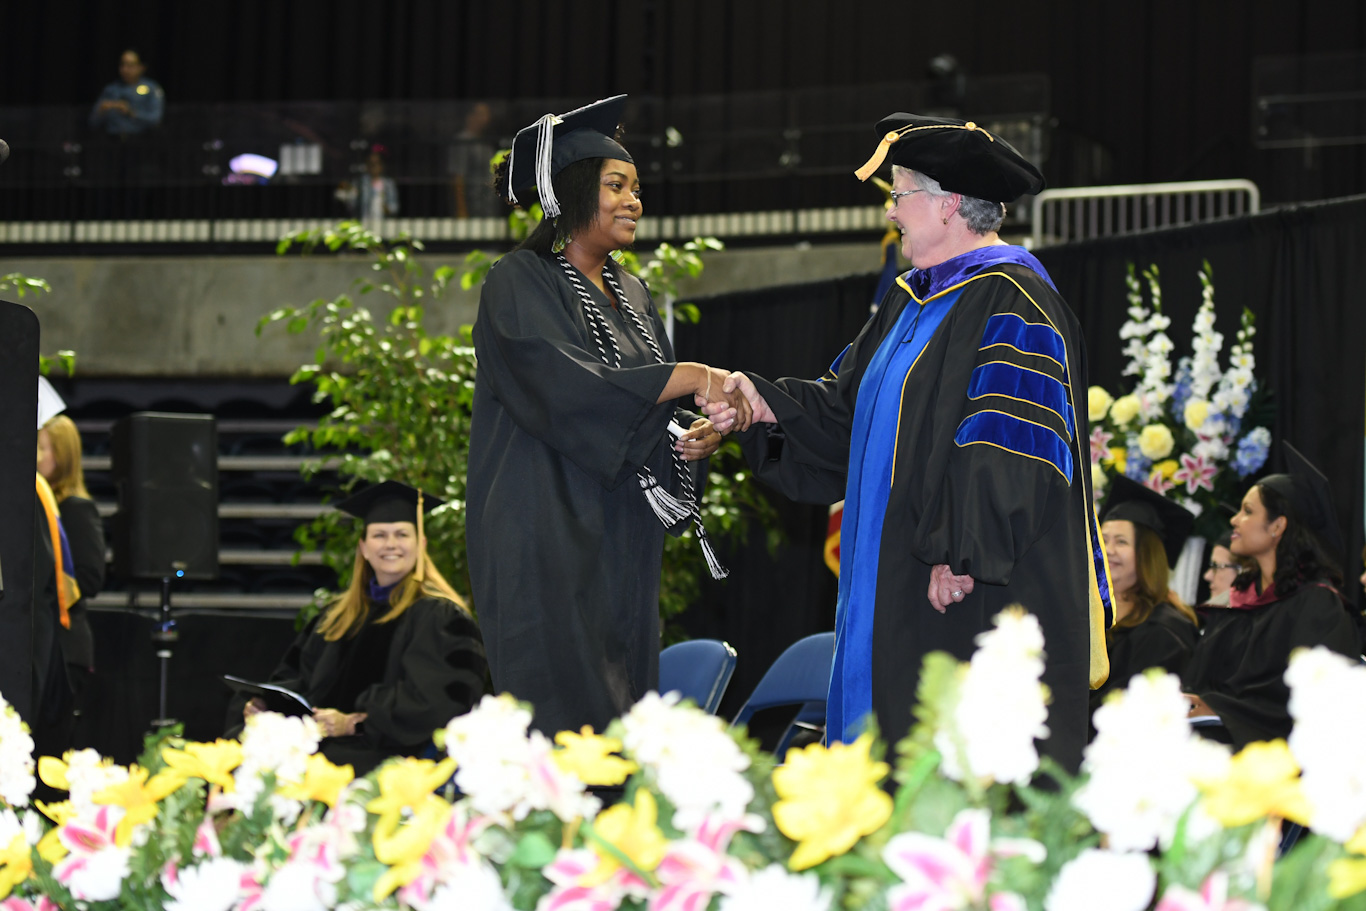 San Joaquin Delta College Superintendent/President Kathy Hart congraulates a graduate at the 2018 Commencement ceremony.